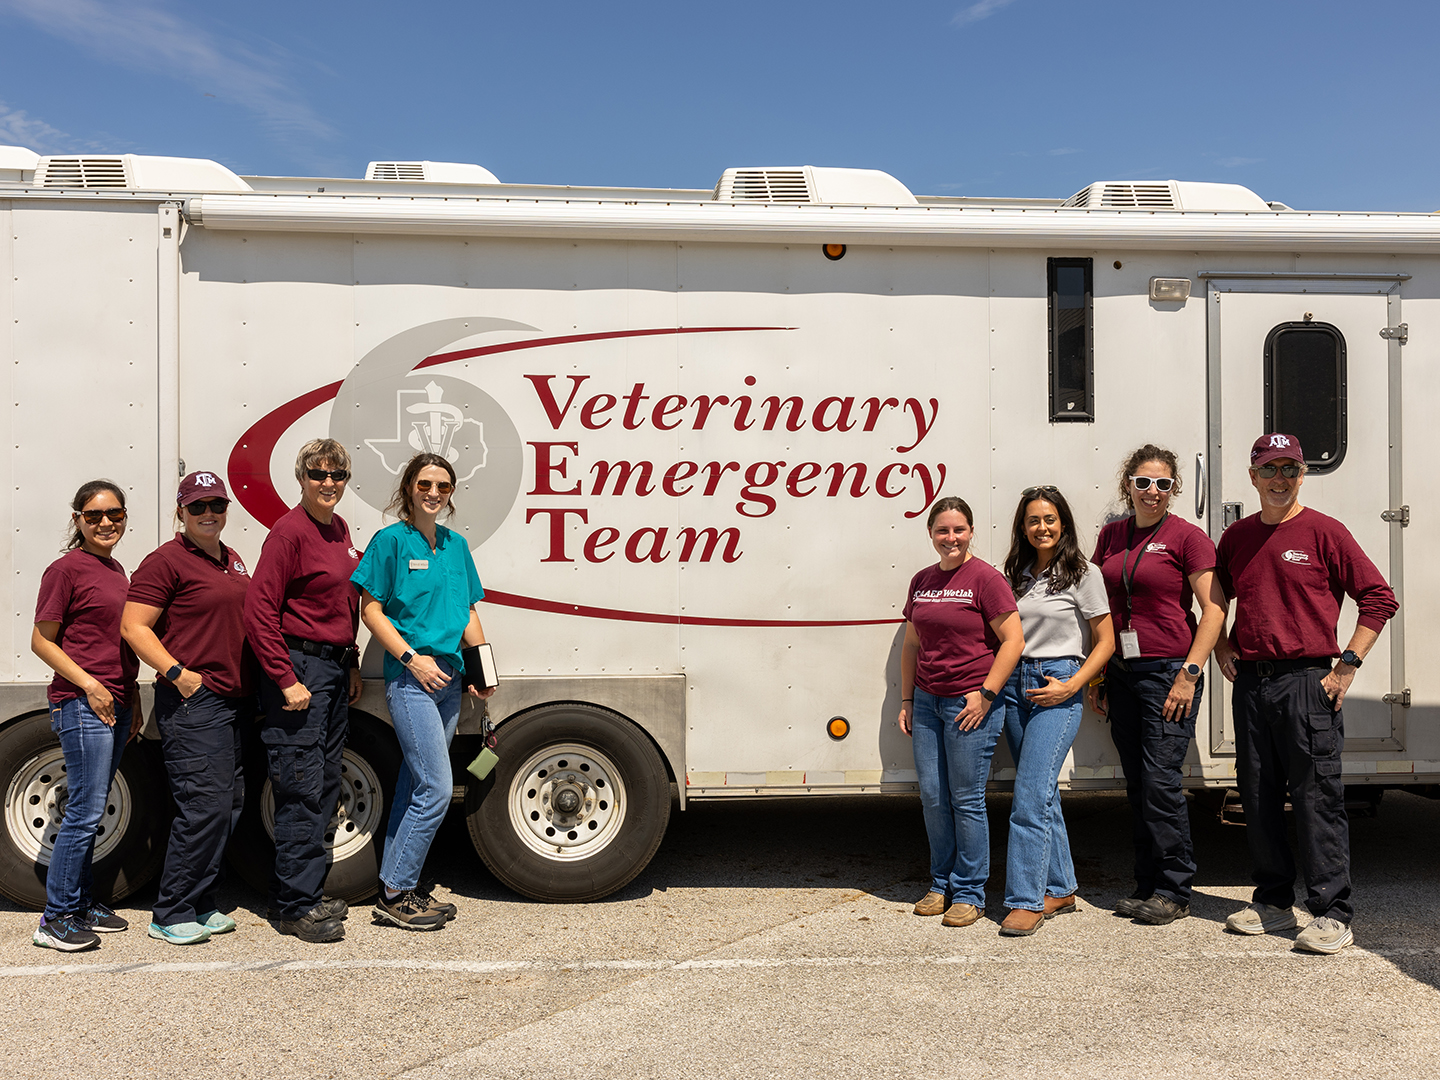 Texas A&M Veterinary Emergency Team Deploys In Response To East Texas Floods